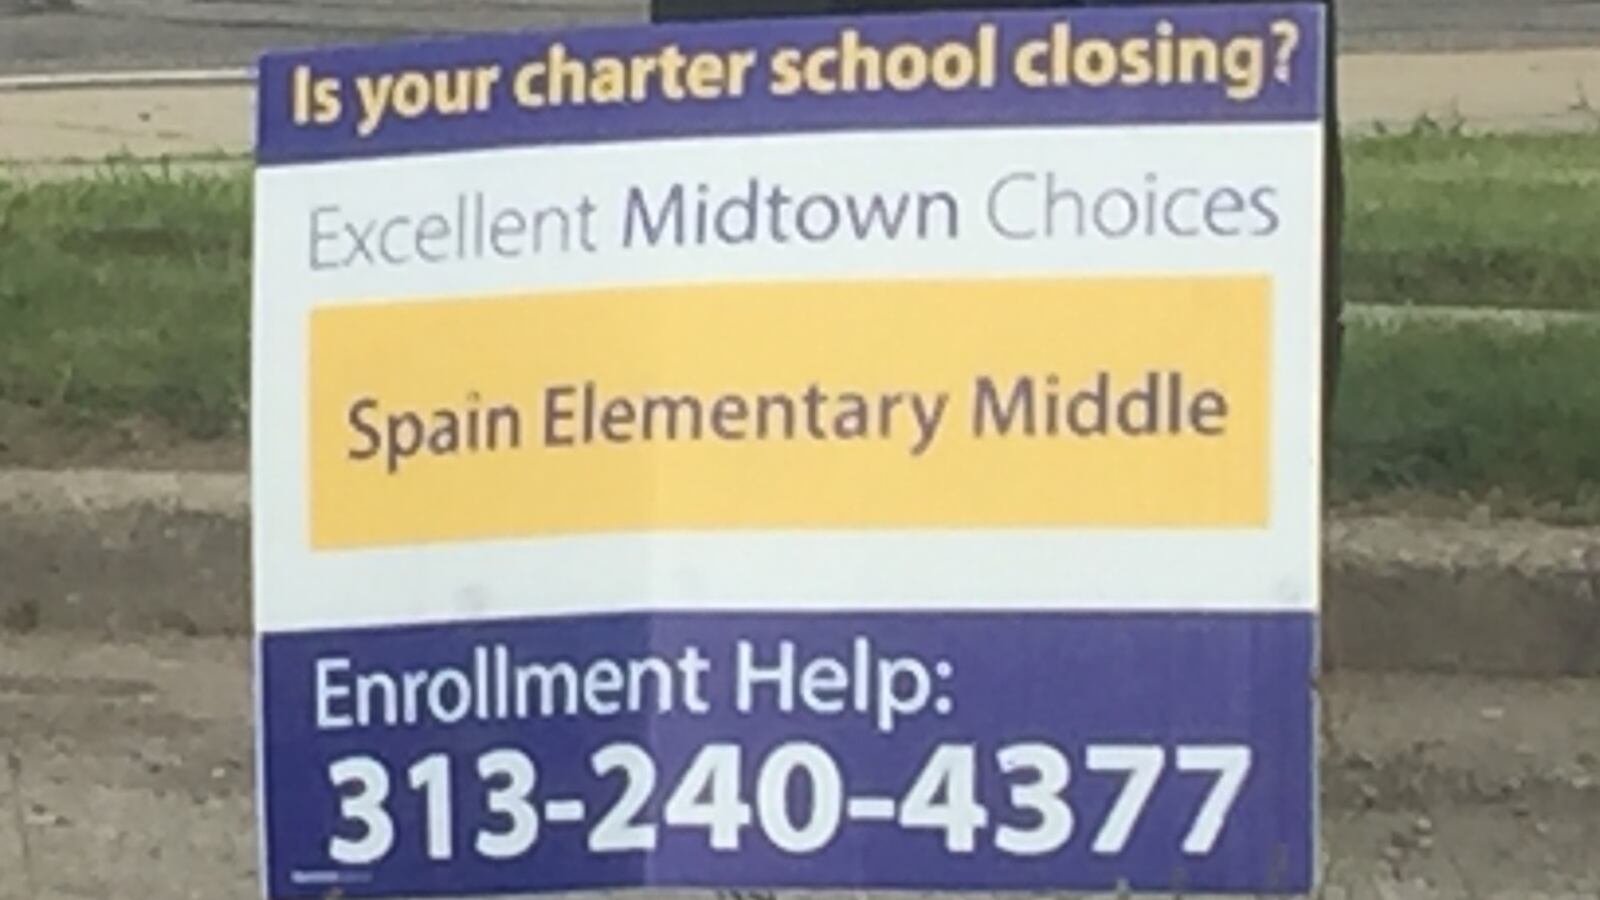 Swooping in: Wth several charter schools closing this year, Detroit’s main district is seizing on the opportunity to try to lure displaced students. Signs like this have sprouted at major intersections.